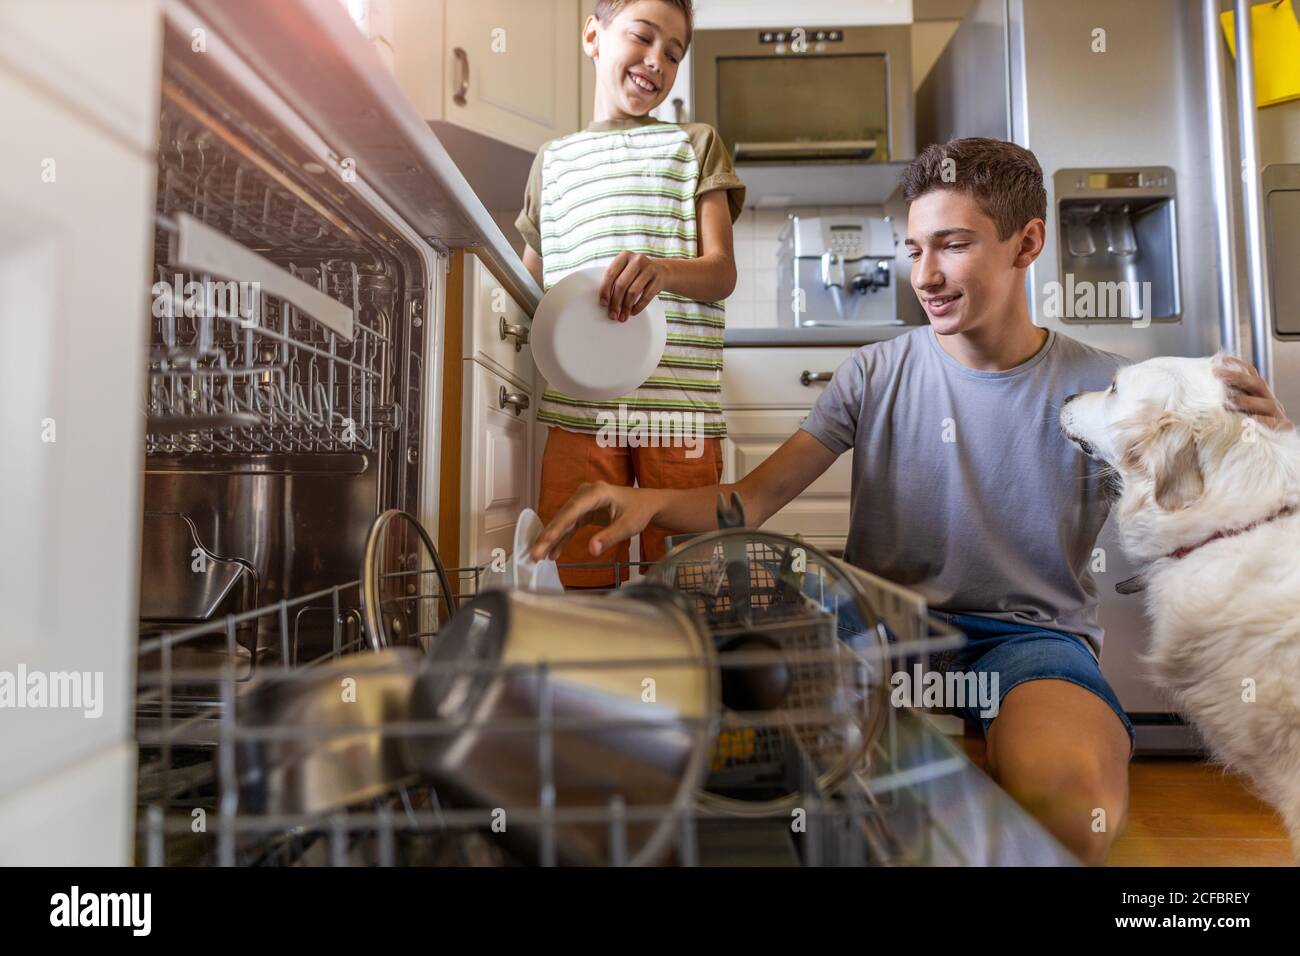 Two boys loading the dishwasher together at home Stock Photo